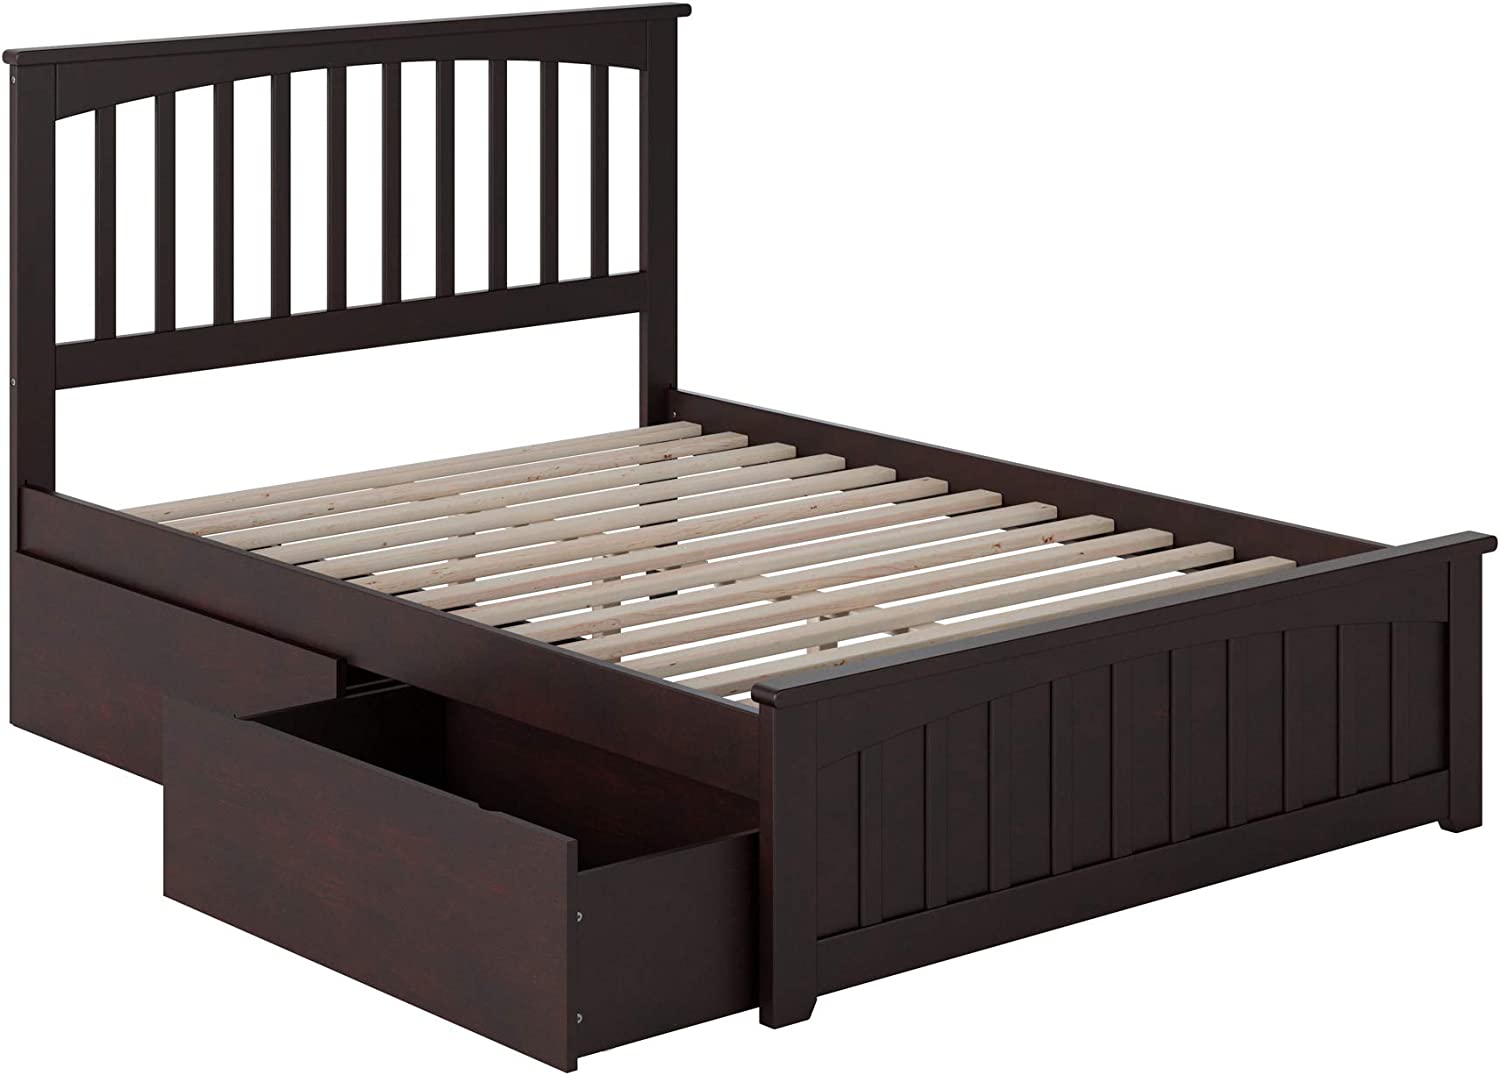 AFI Mission Platform Matching Footboard and Turbo Charger with Urban Bed Drawers, Full, Espresso